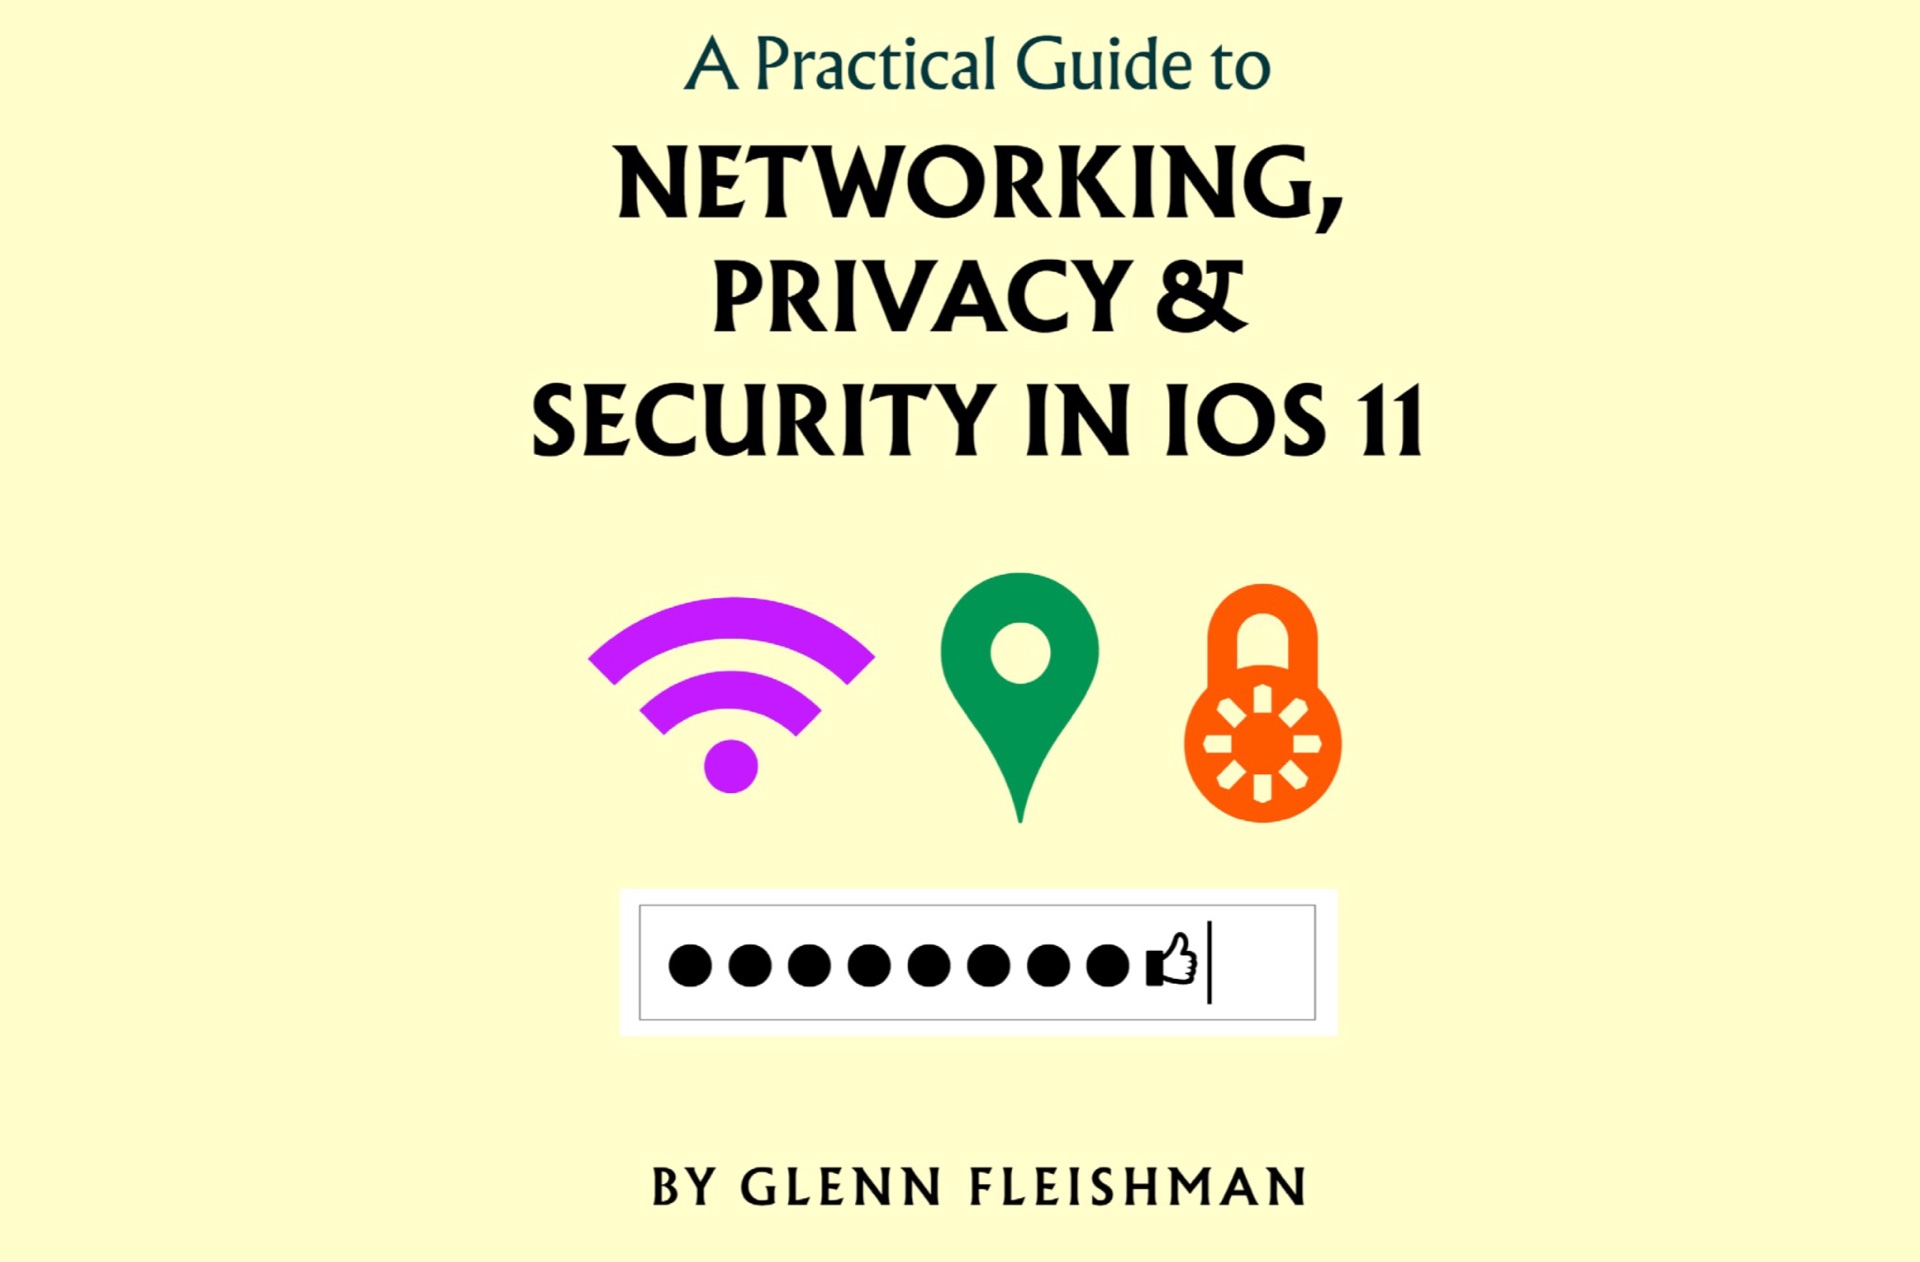 a-practical-guide-to-networking-privacy-and-security-in-ios-11-by-glenn-fleishman